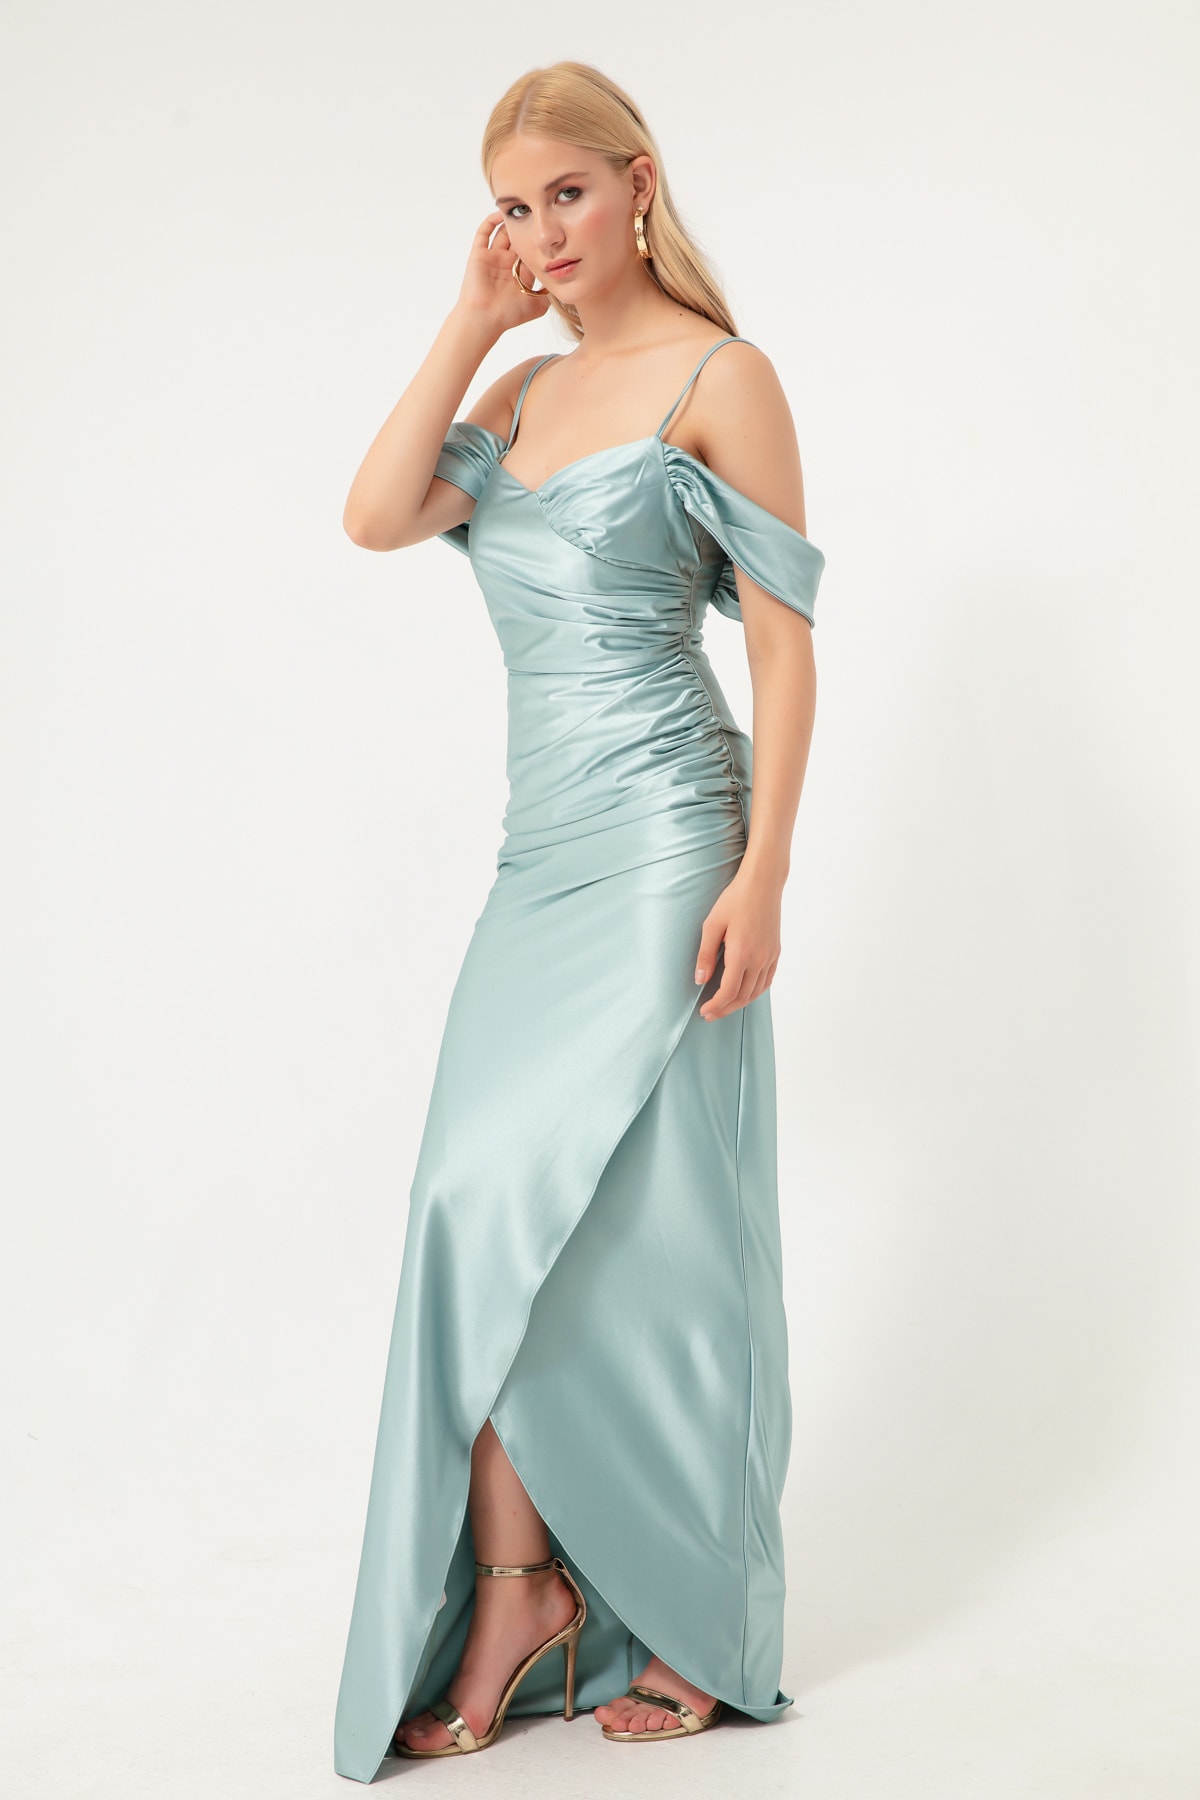 Lafaba Women's Turquoise Evening Dress with Thin Straps, Double Breasted Collar and Slits.